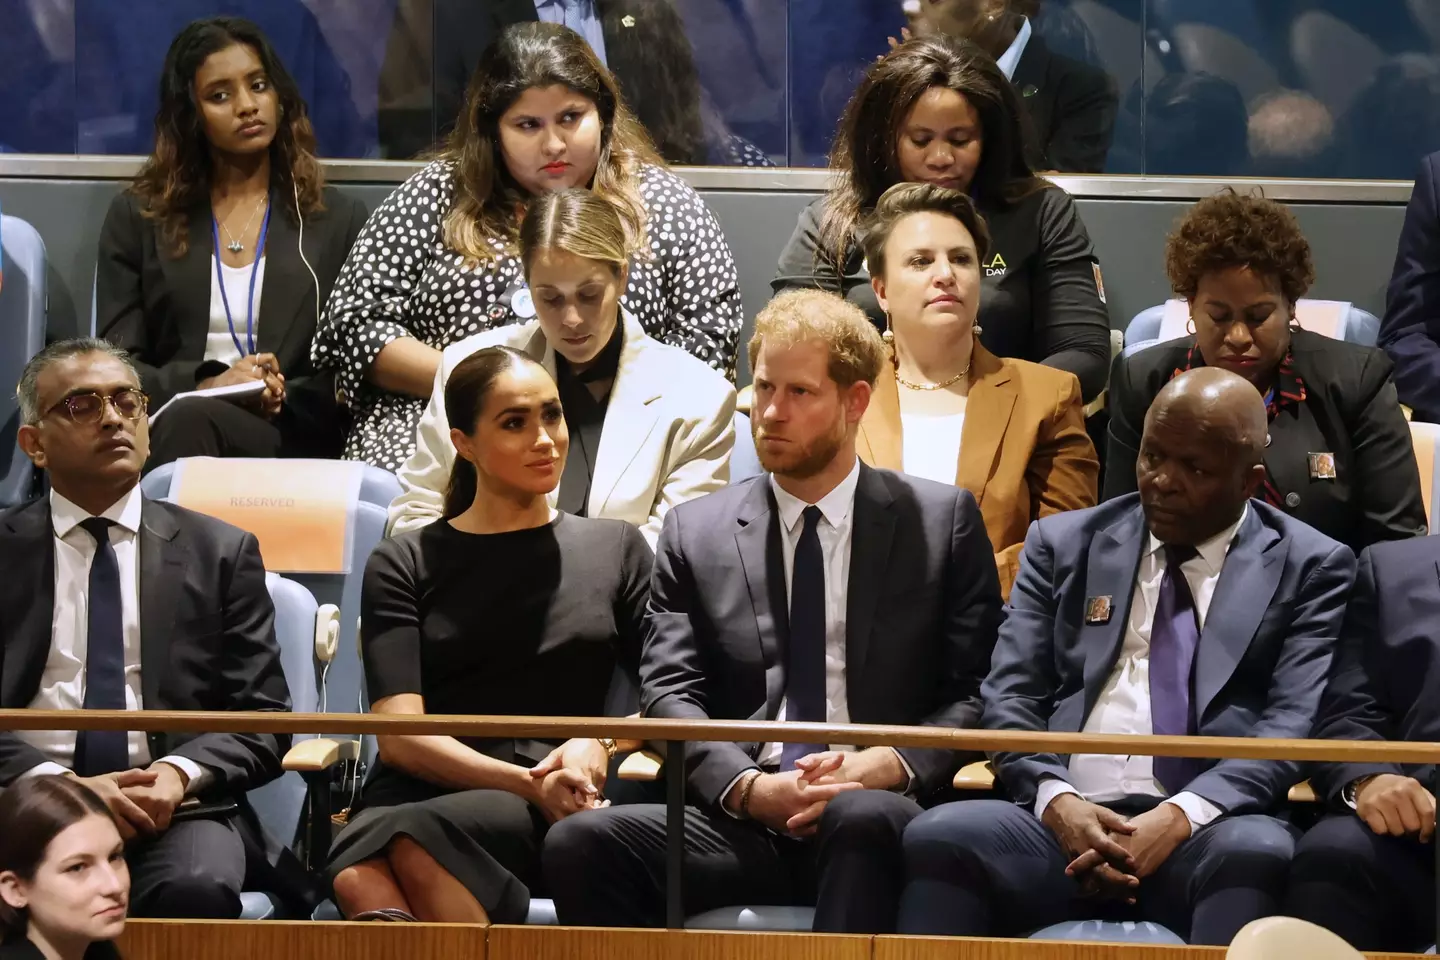 Meghan Markle gave the woman a bottle of water.